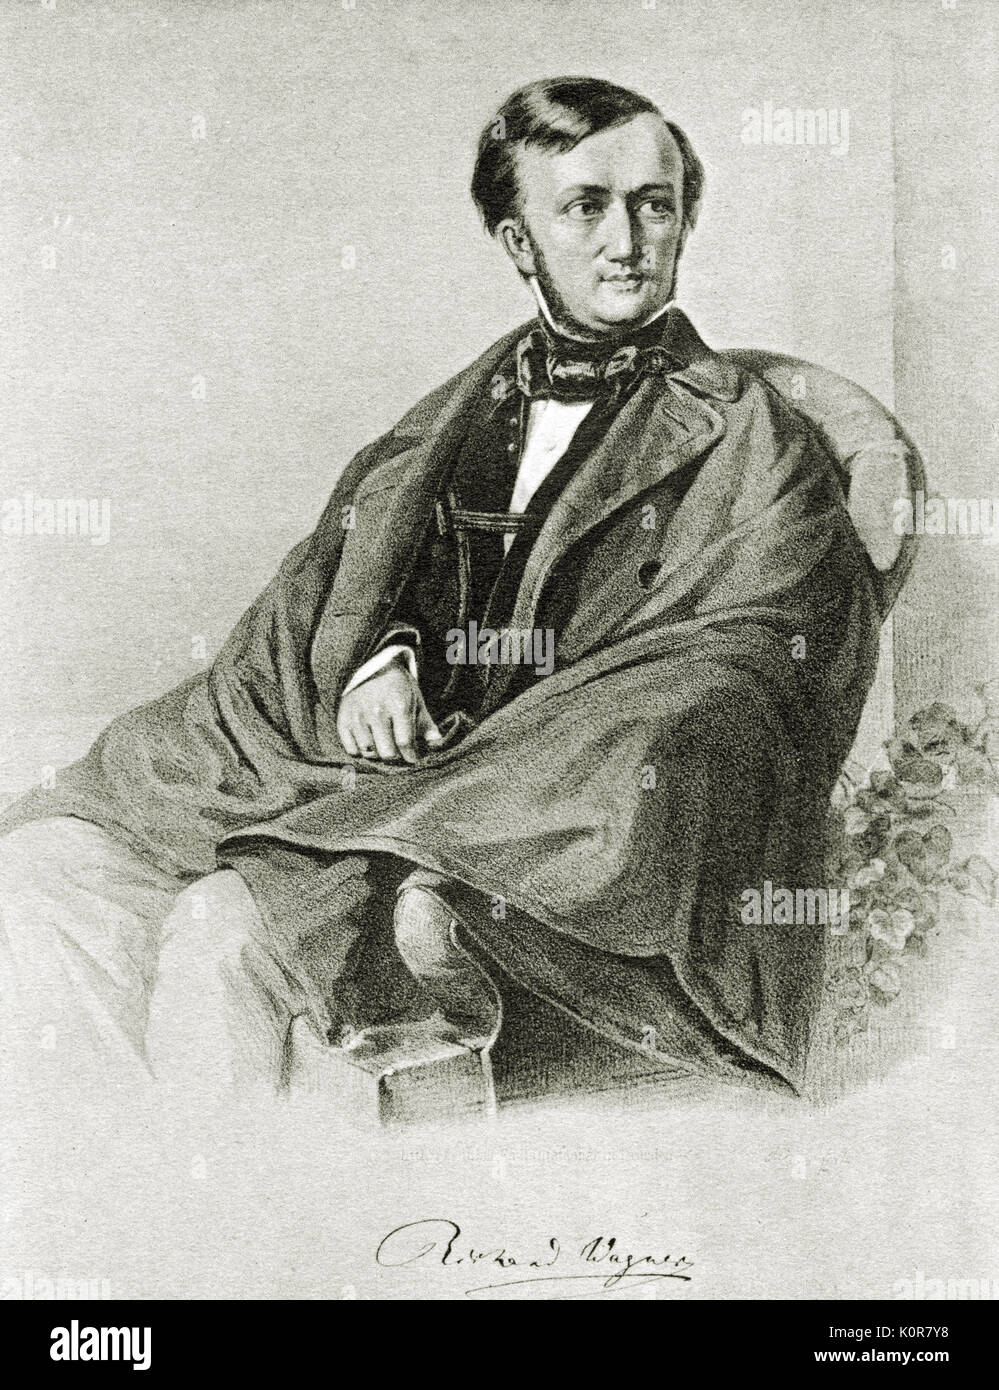 Richard Wagner, portrait, 1853. Lithograph. German composer & author, 22 May 1813 - 13 February 1883. Stock Photo